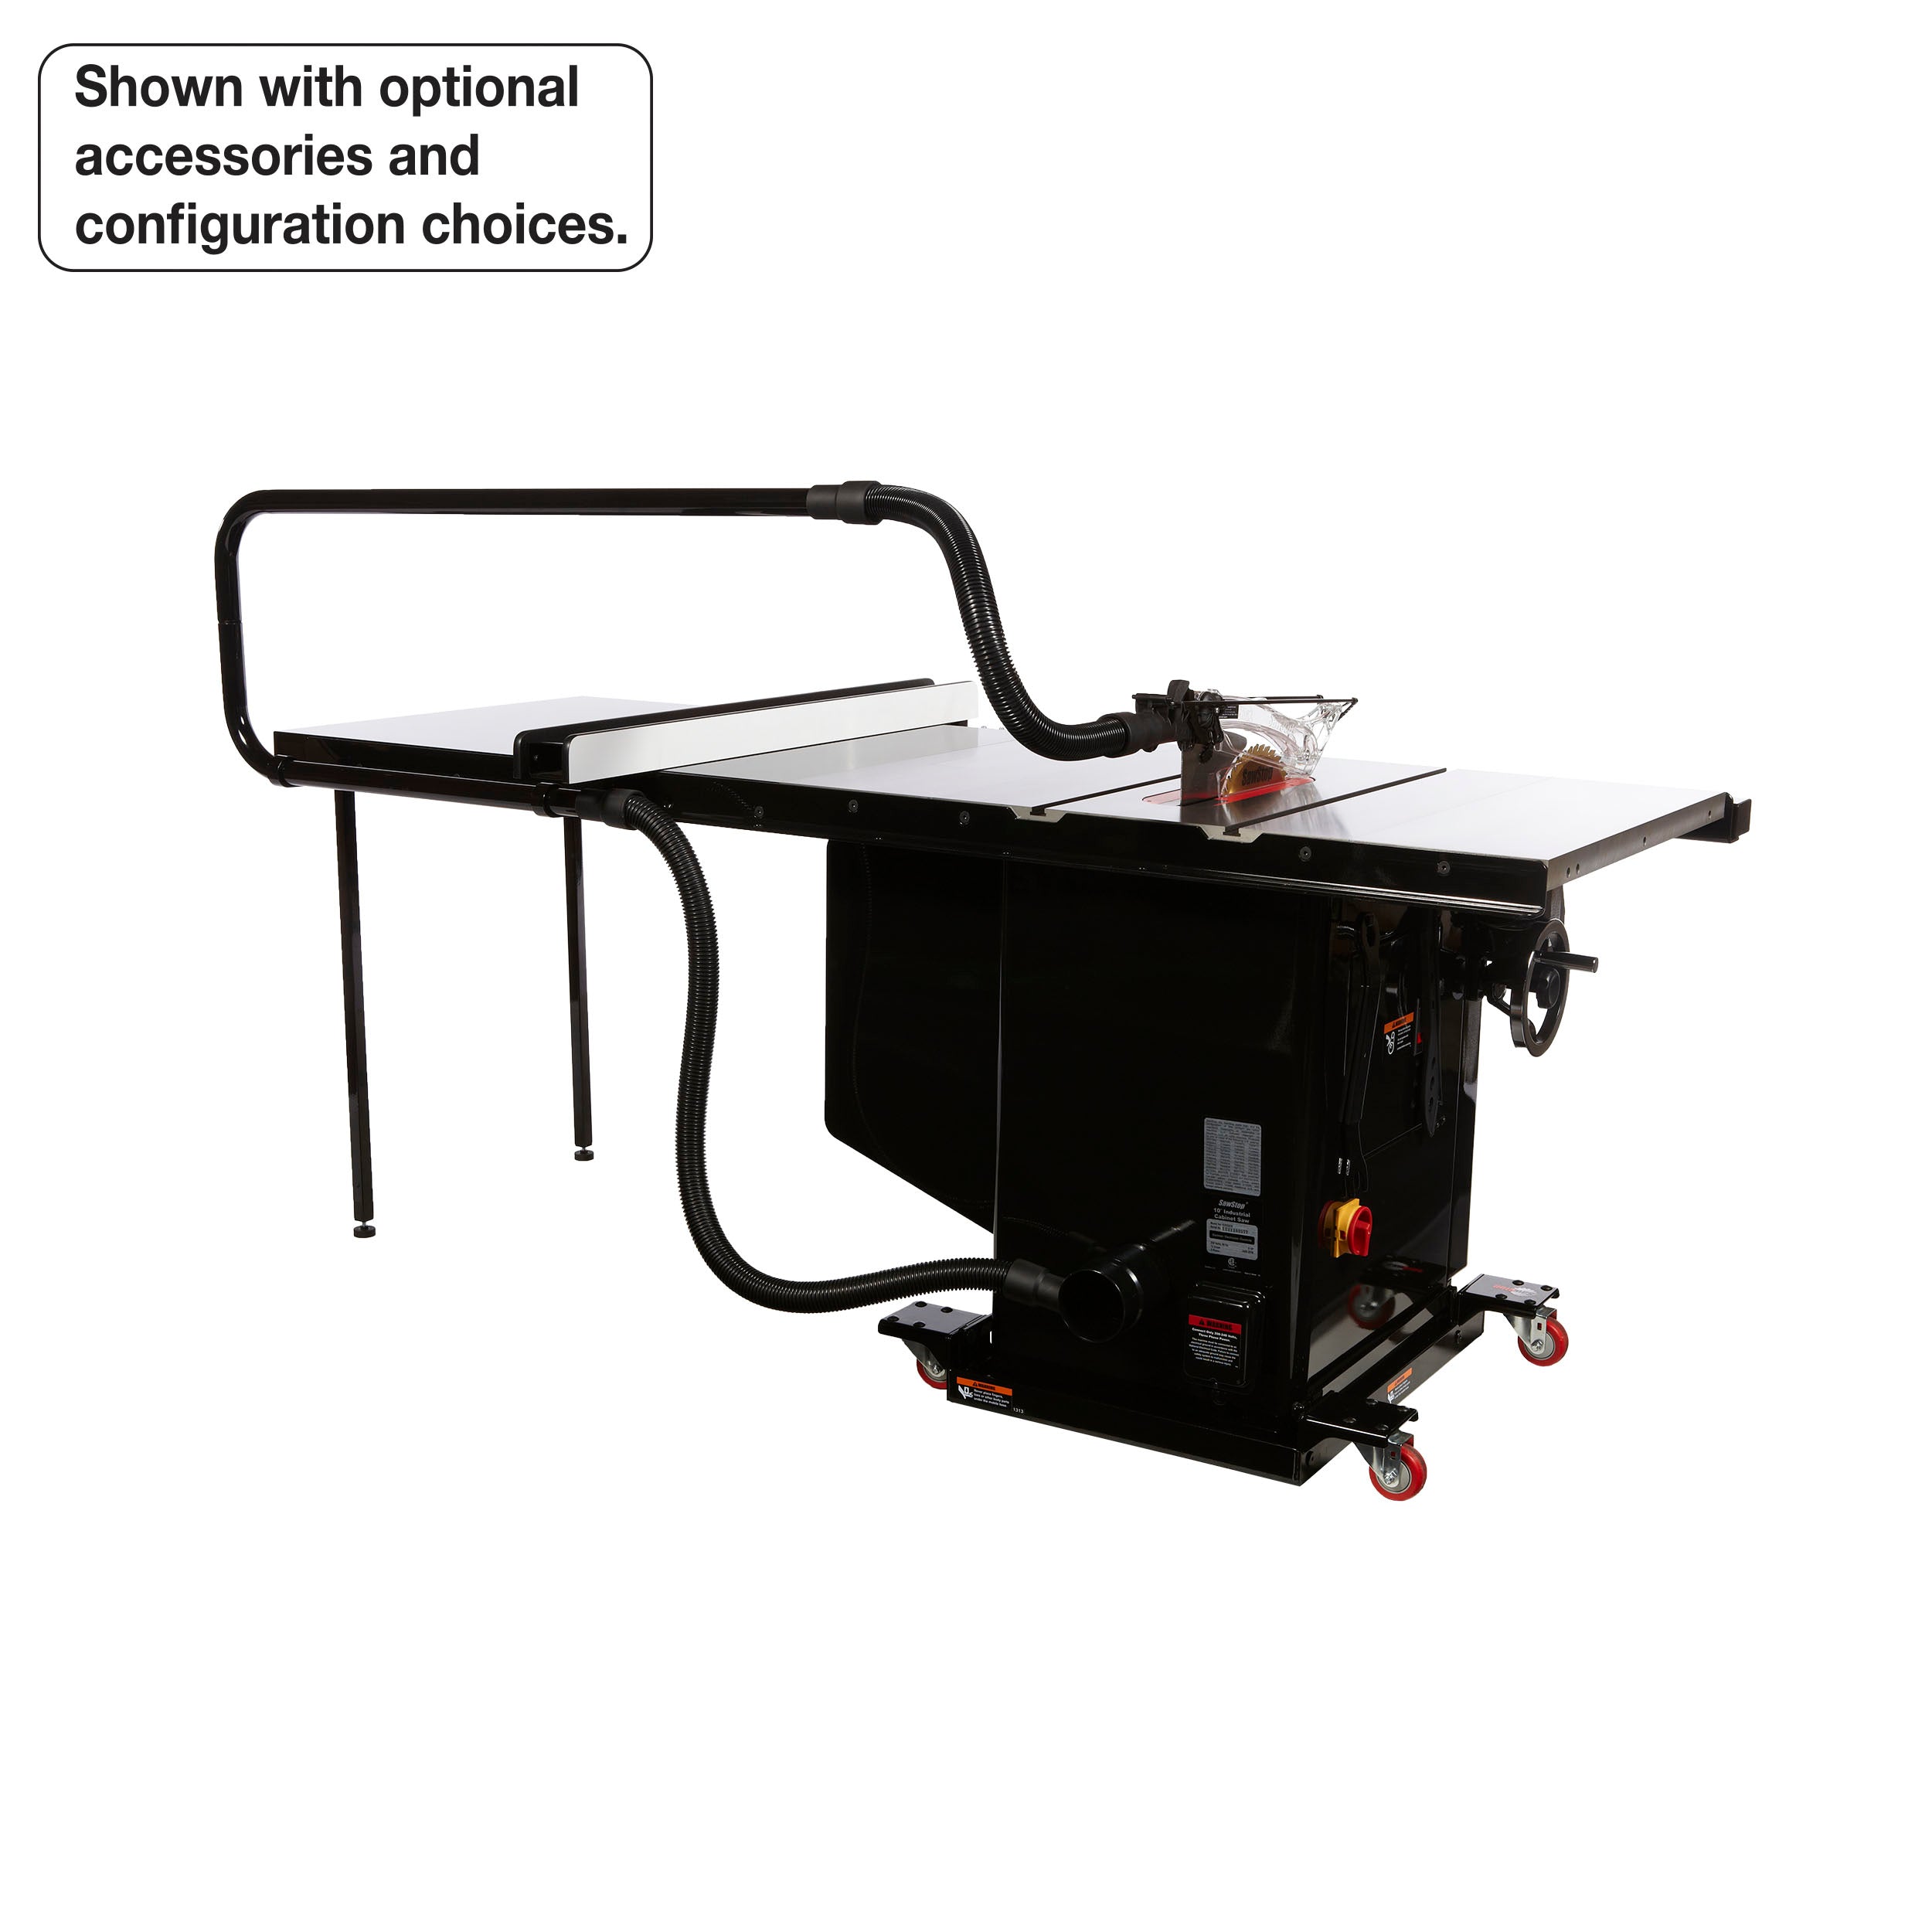 SawStop 5HP, 3ph, 480v Industrial Cabinet Saw w/ 36